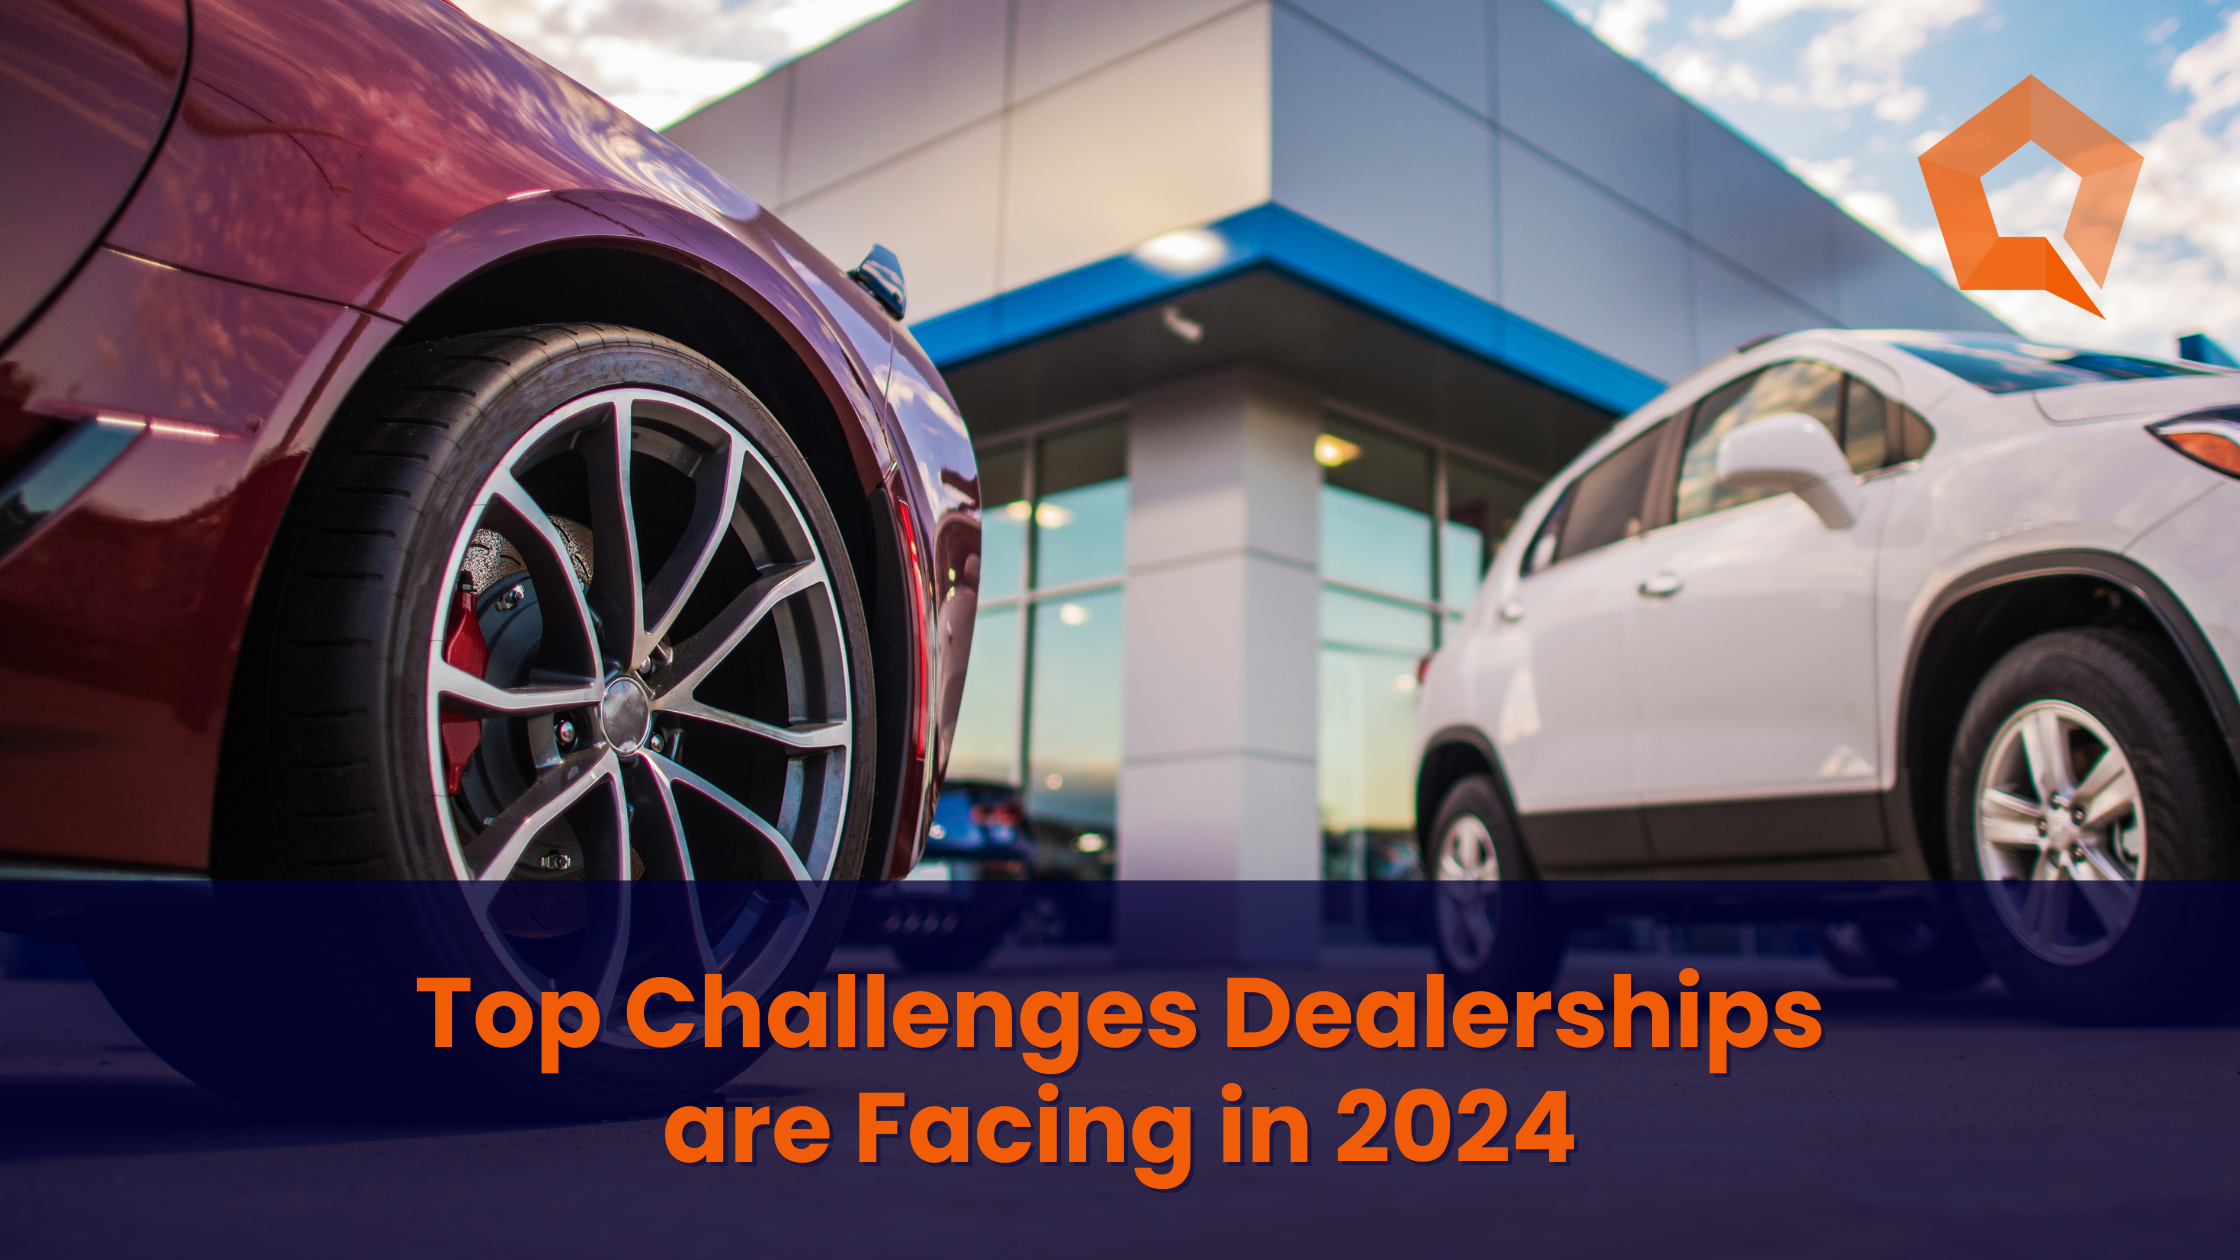 Top Challenges Dealerships are Facing in 2024